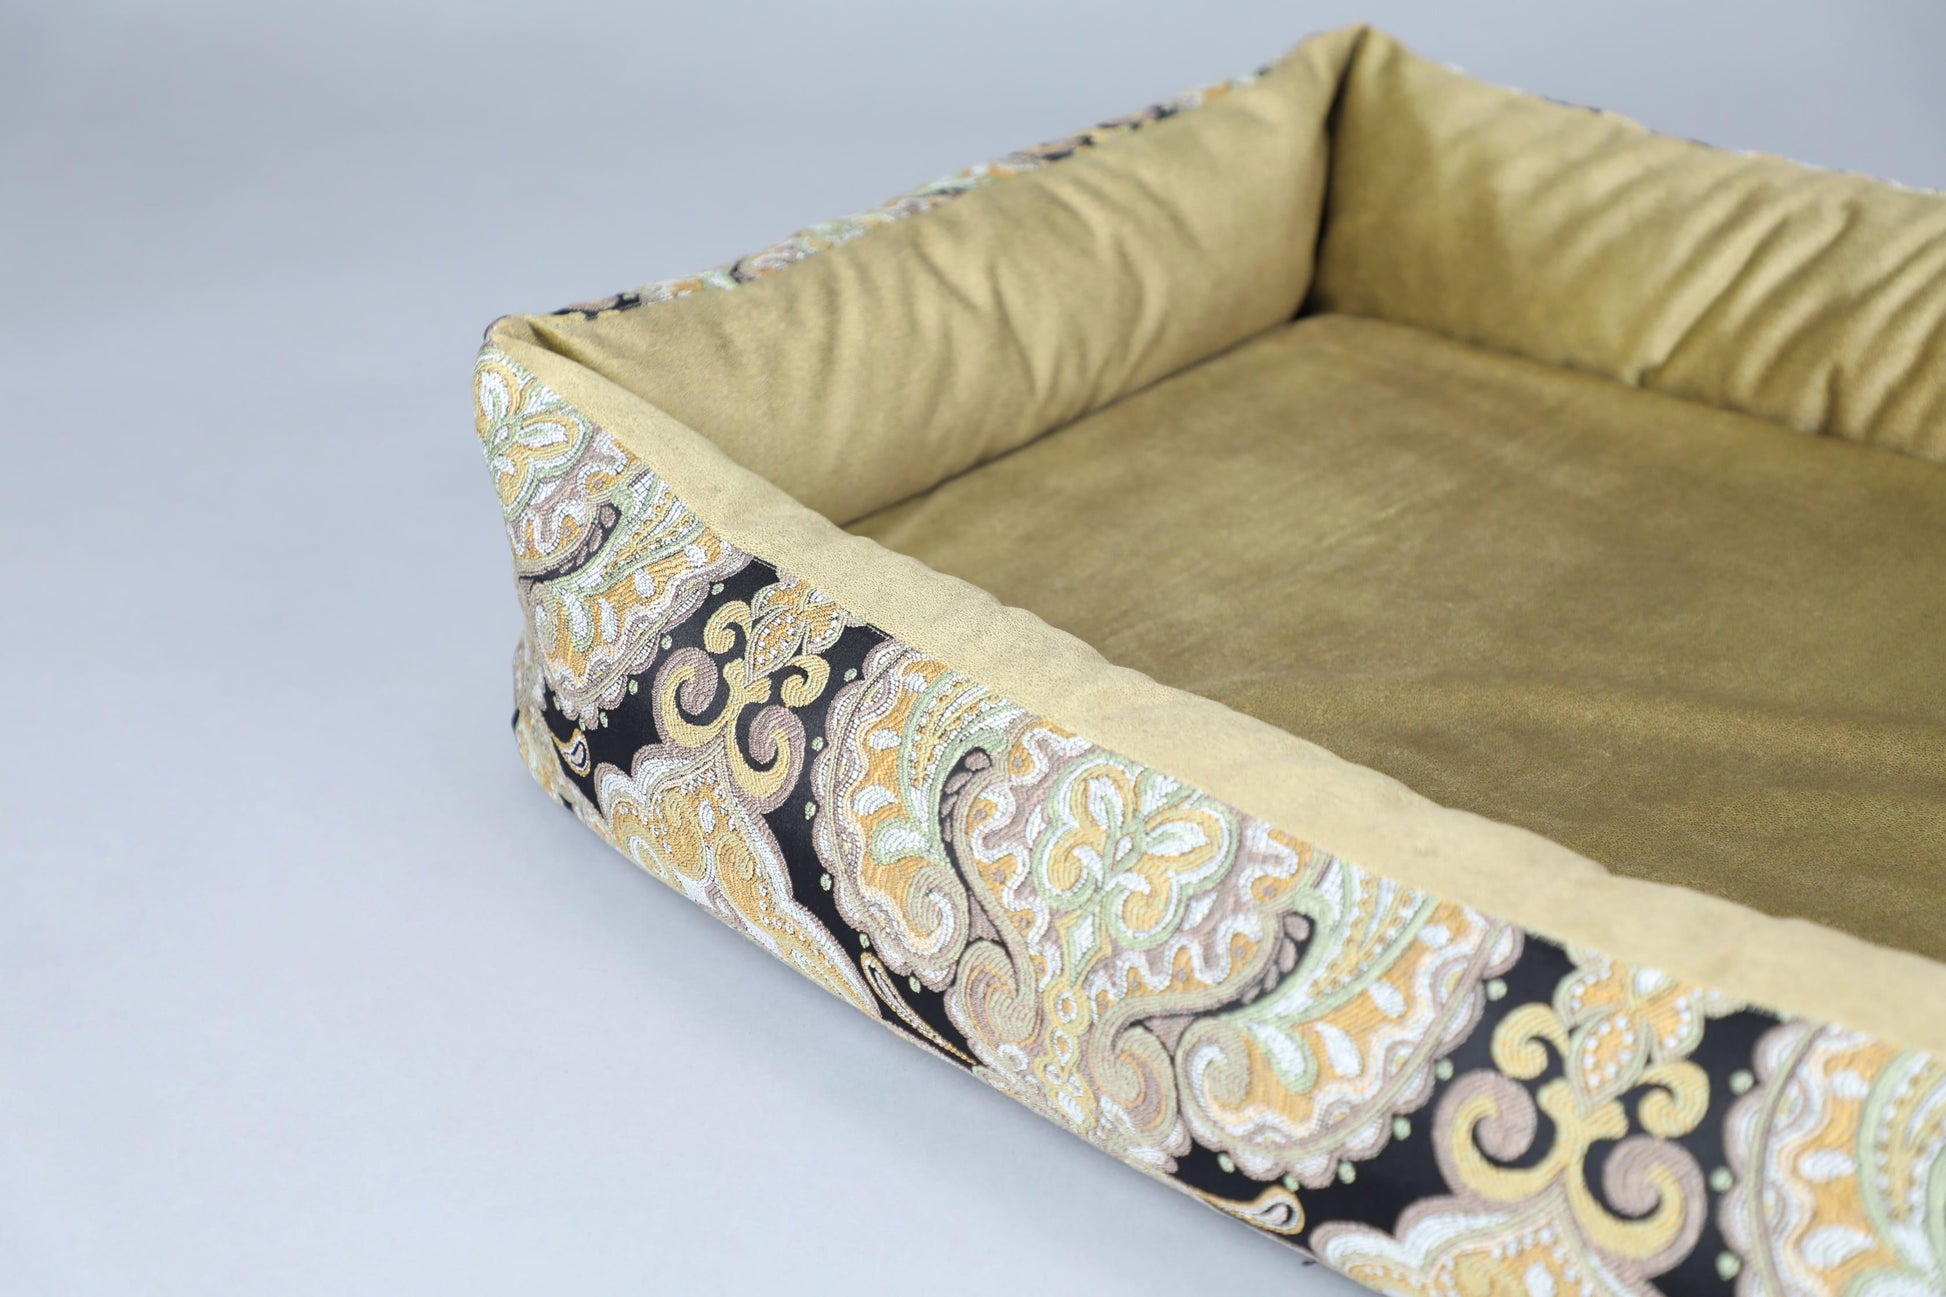 2-sided bohemian style dog bed. DARK KHAKI - handmade in Lithuania by My Wild Other